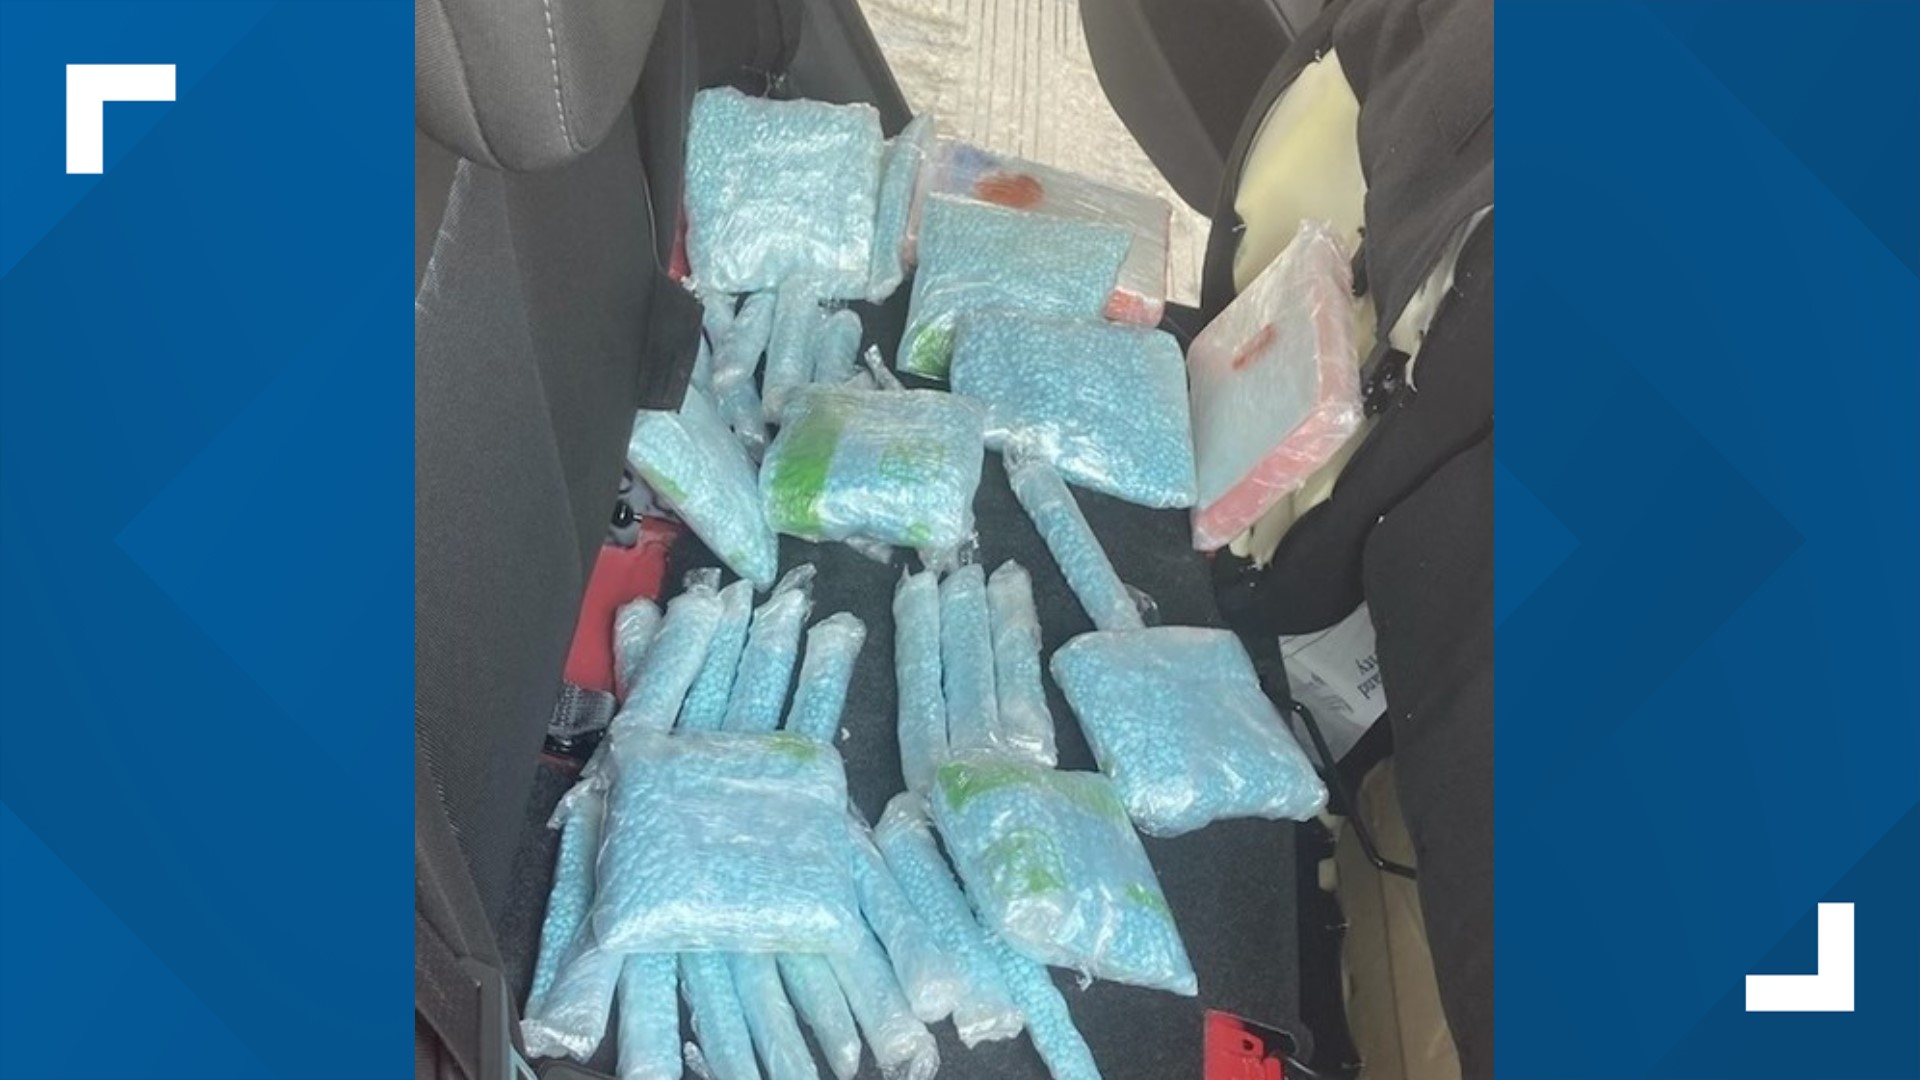 Inside the car, troopers found Oxycodone Hydrochloride pills and fentanyl bricks and pills in the hollowed-out seat cushions.